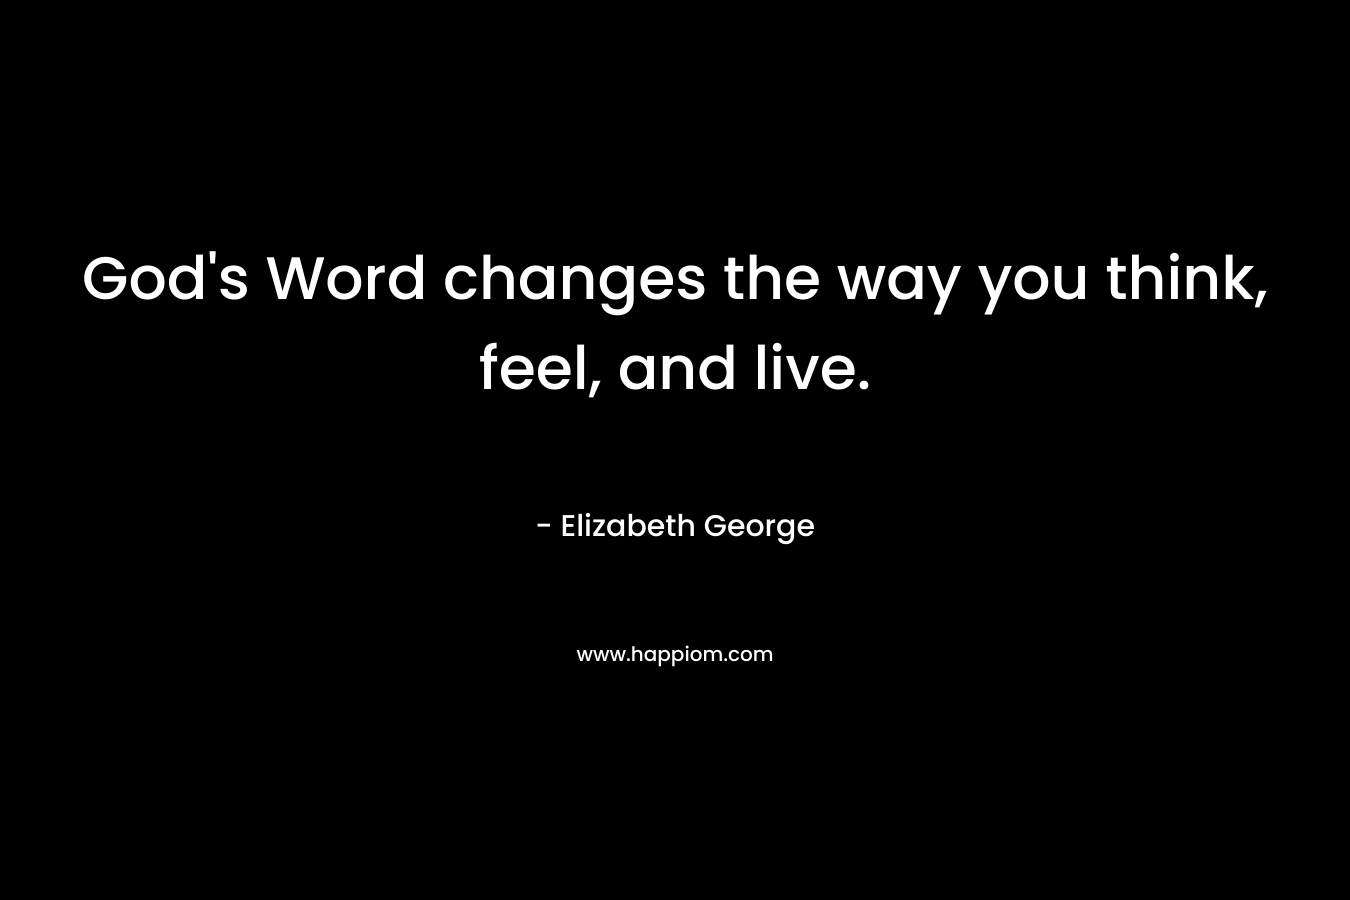 God's Word changes the way you think, feel, and live.